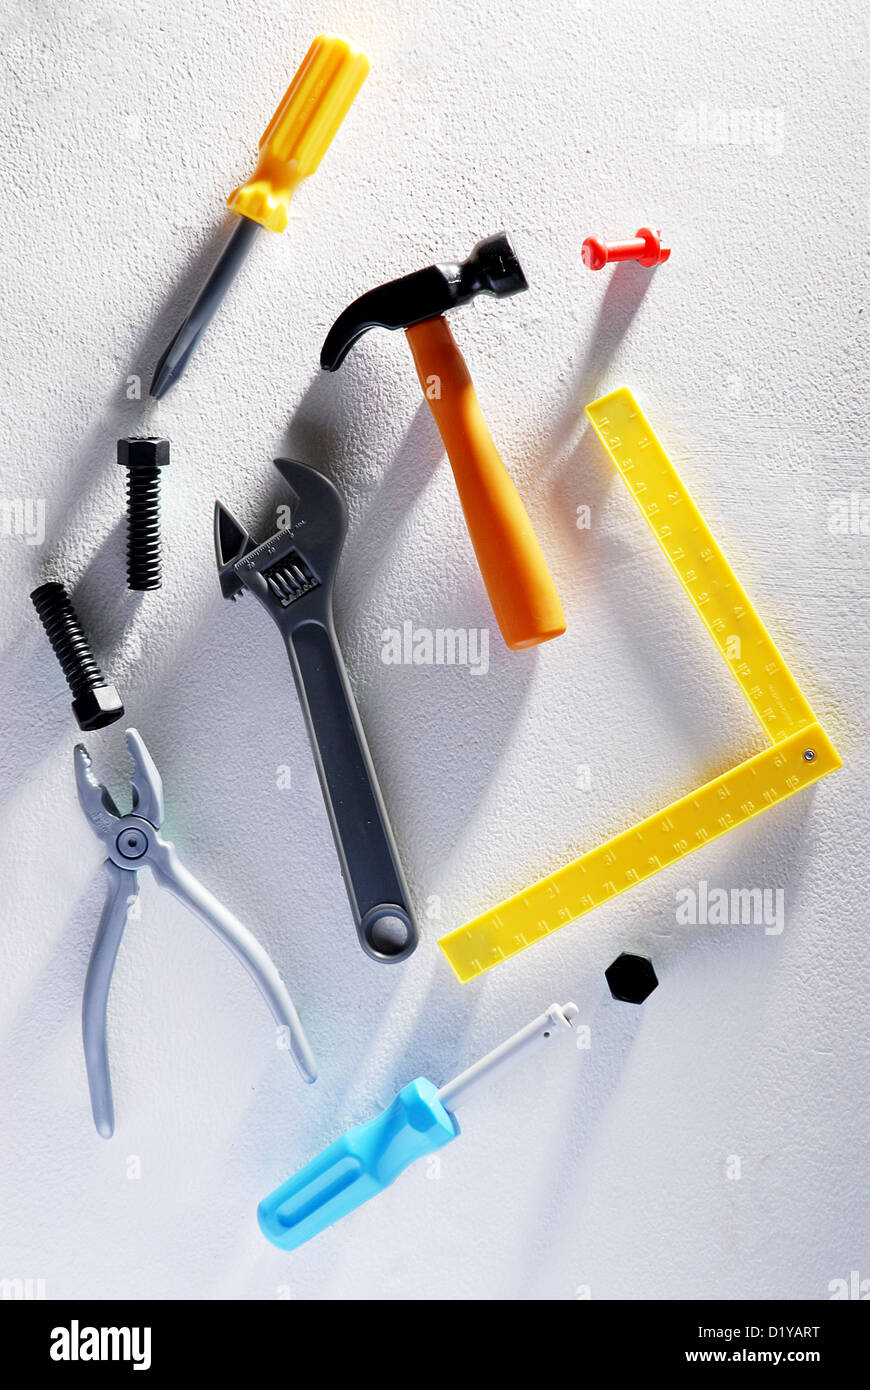 Playing toys set of repair tools like screwdriver, hammer, wrench, made from plastic. Repair tools for kids Stock Photo